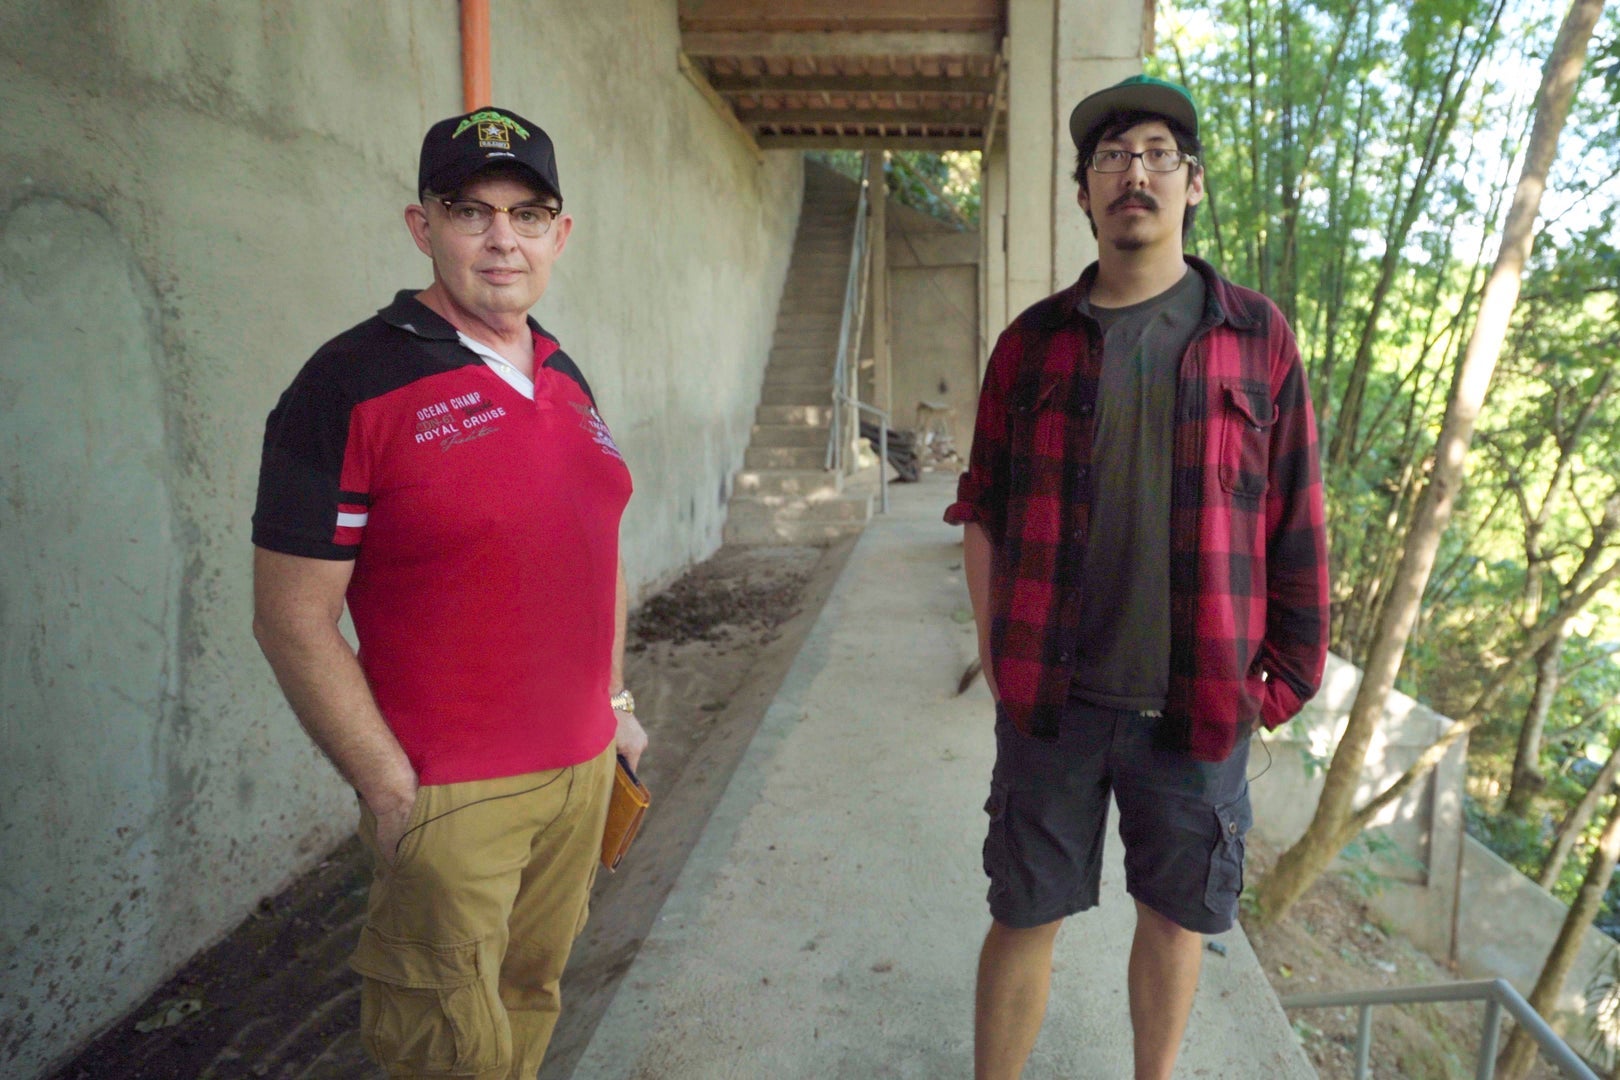 Jim and Ron Watkins look at the camera as they stand on a concrete walkway on a pig farm.